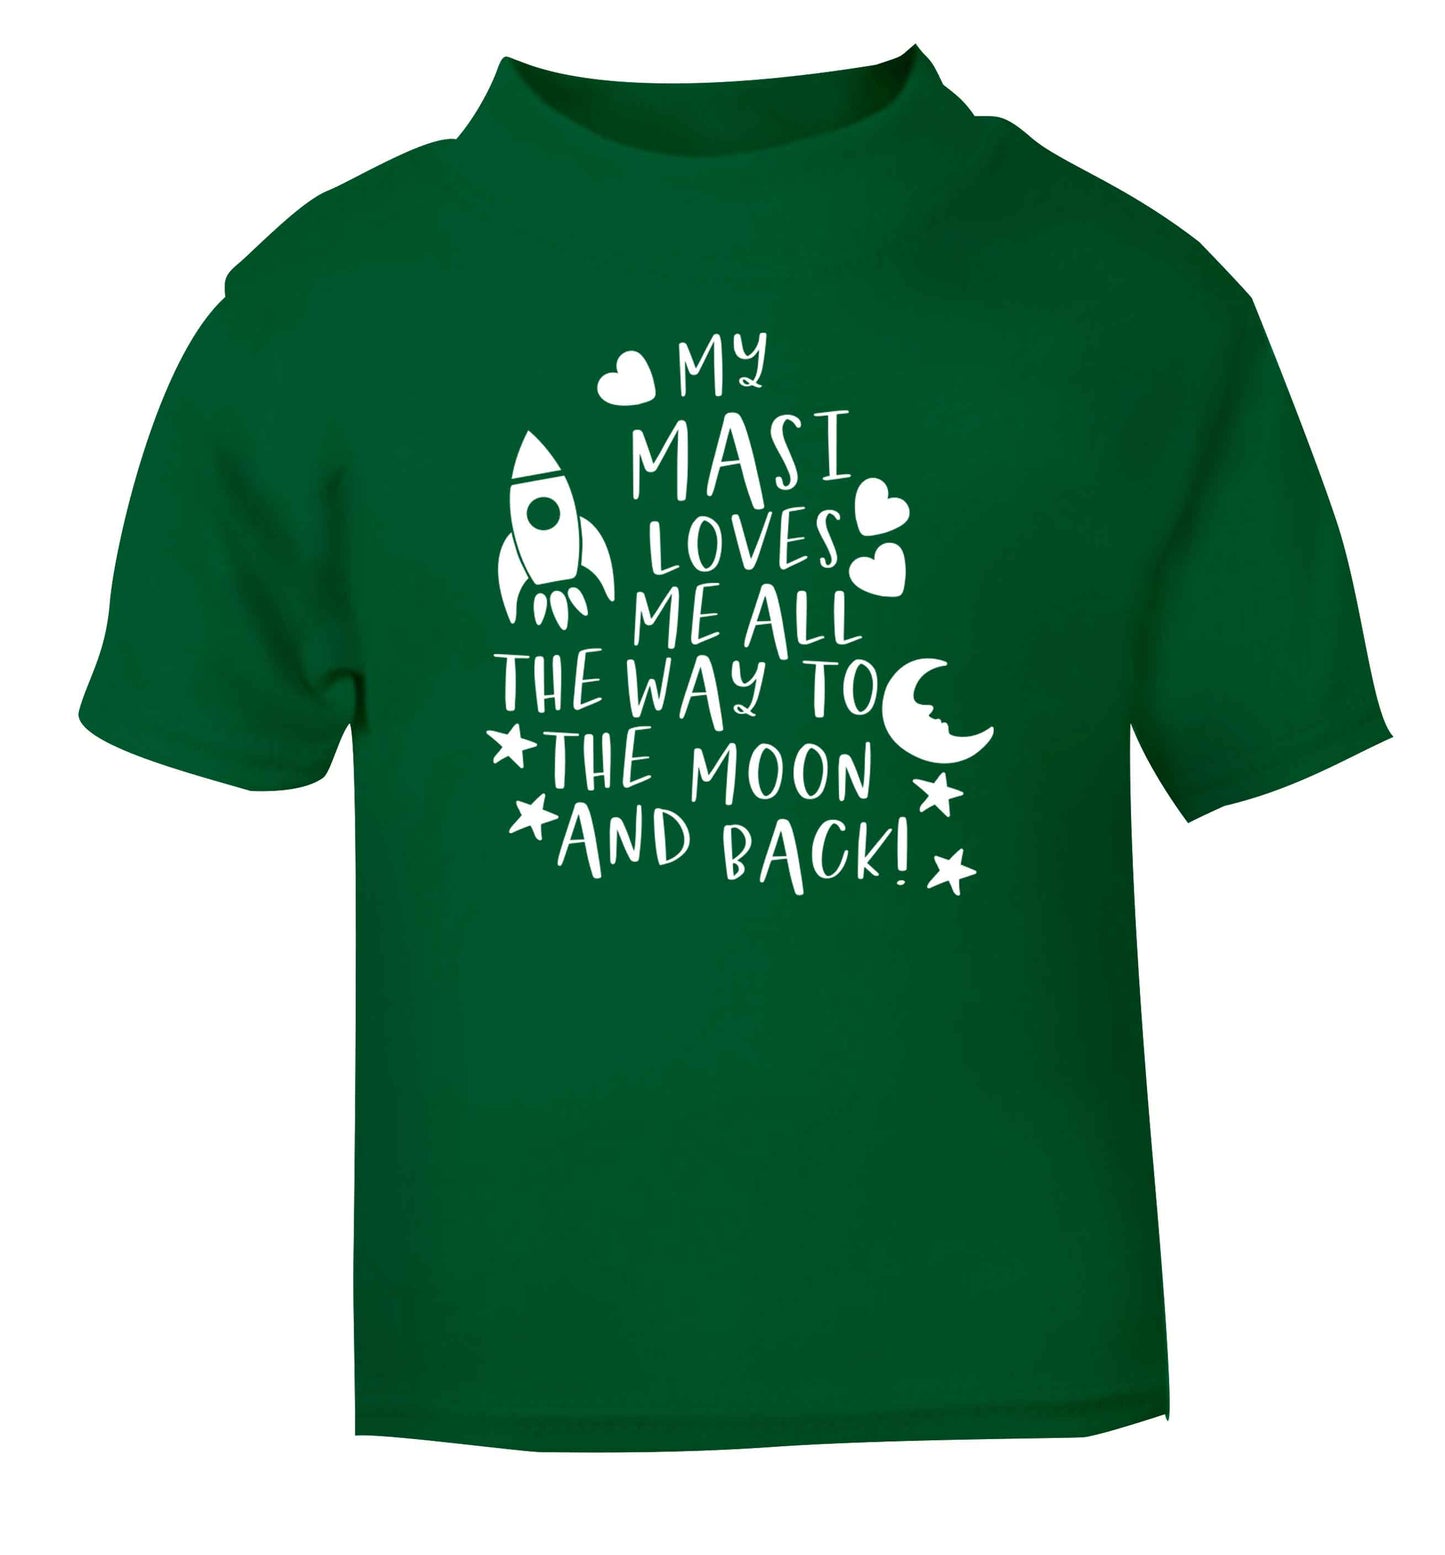 My masi loves me all the way to the moon and back green Baby Toddler Tshirt 2 Years